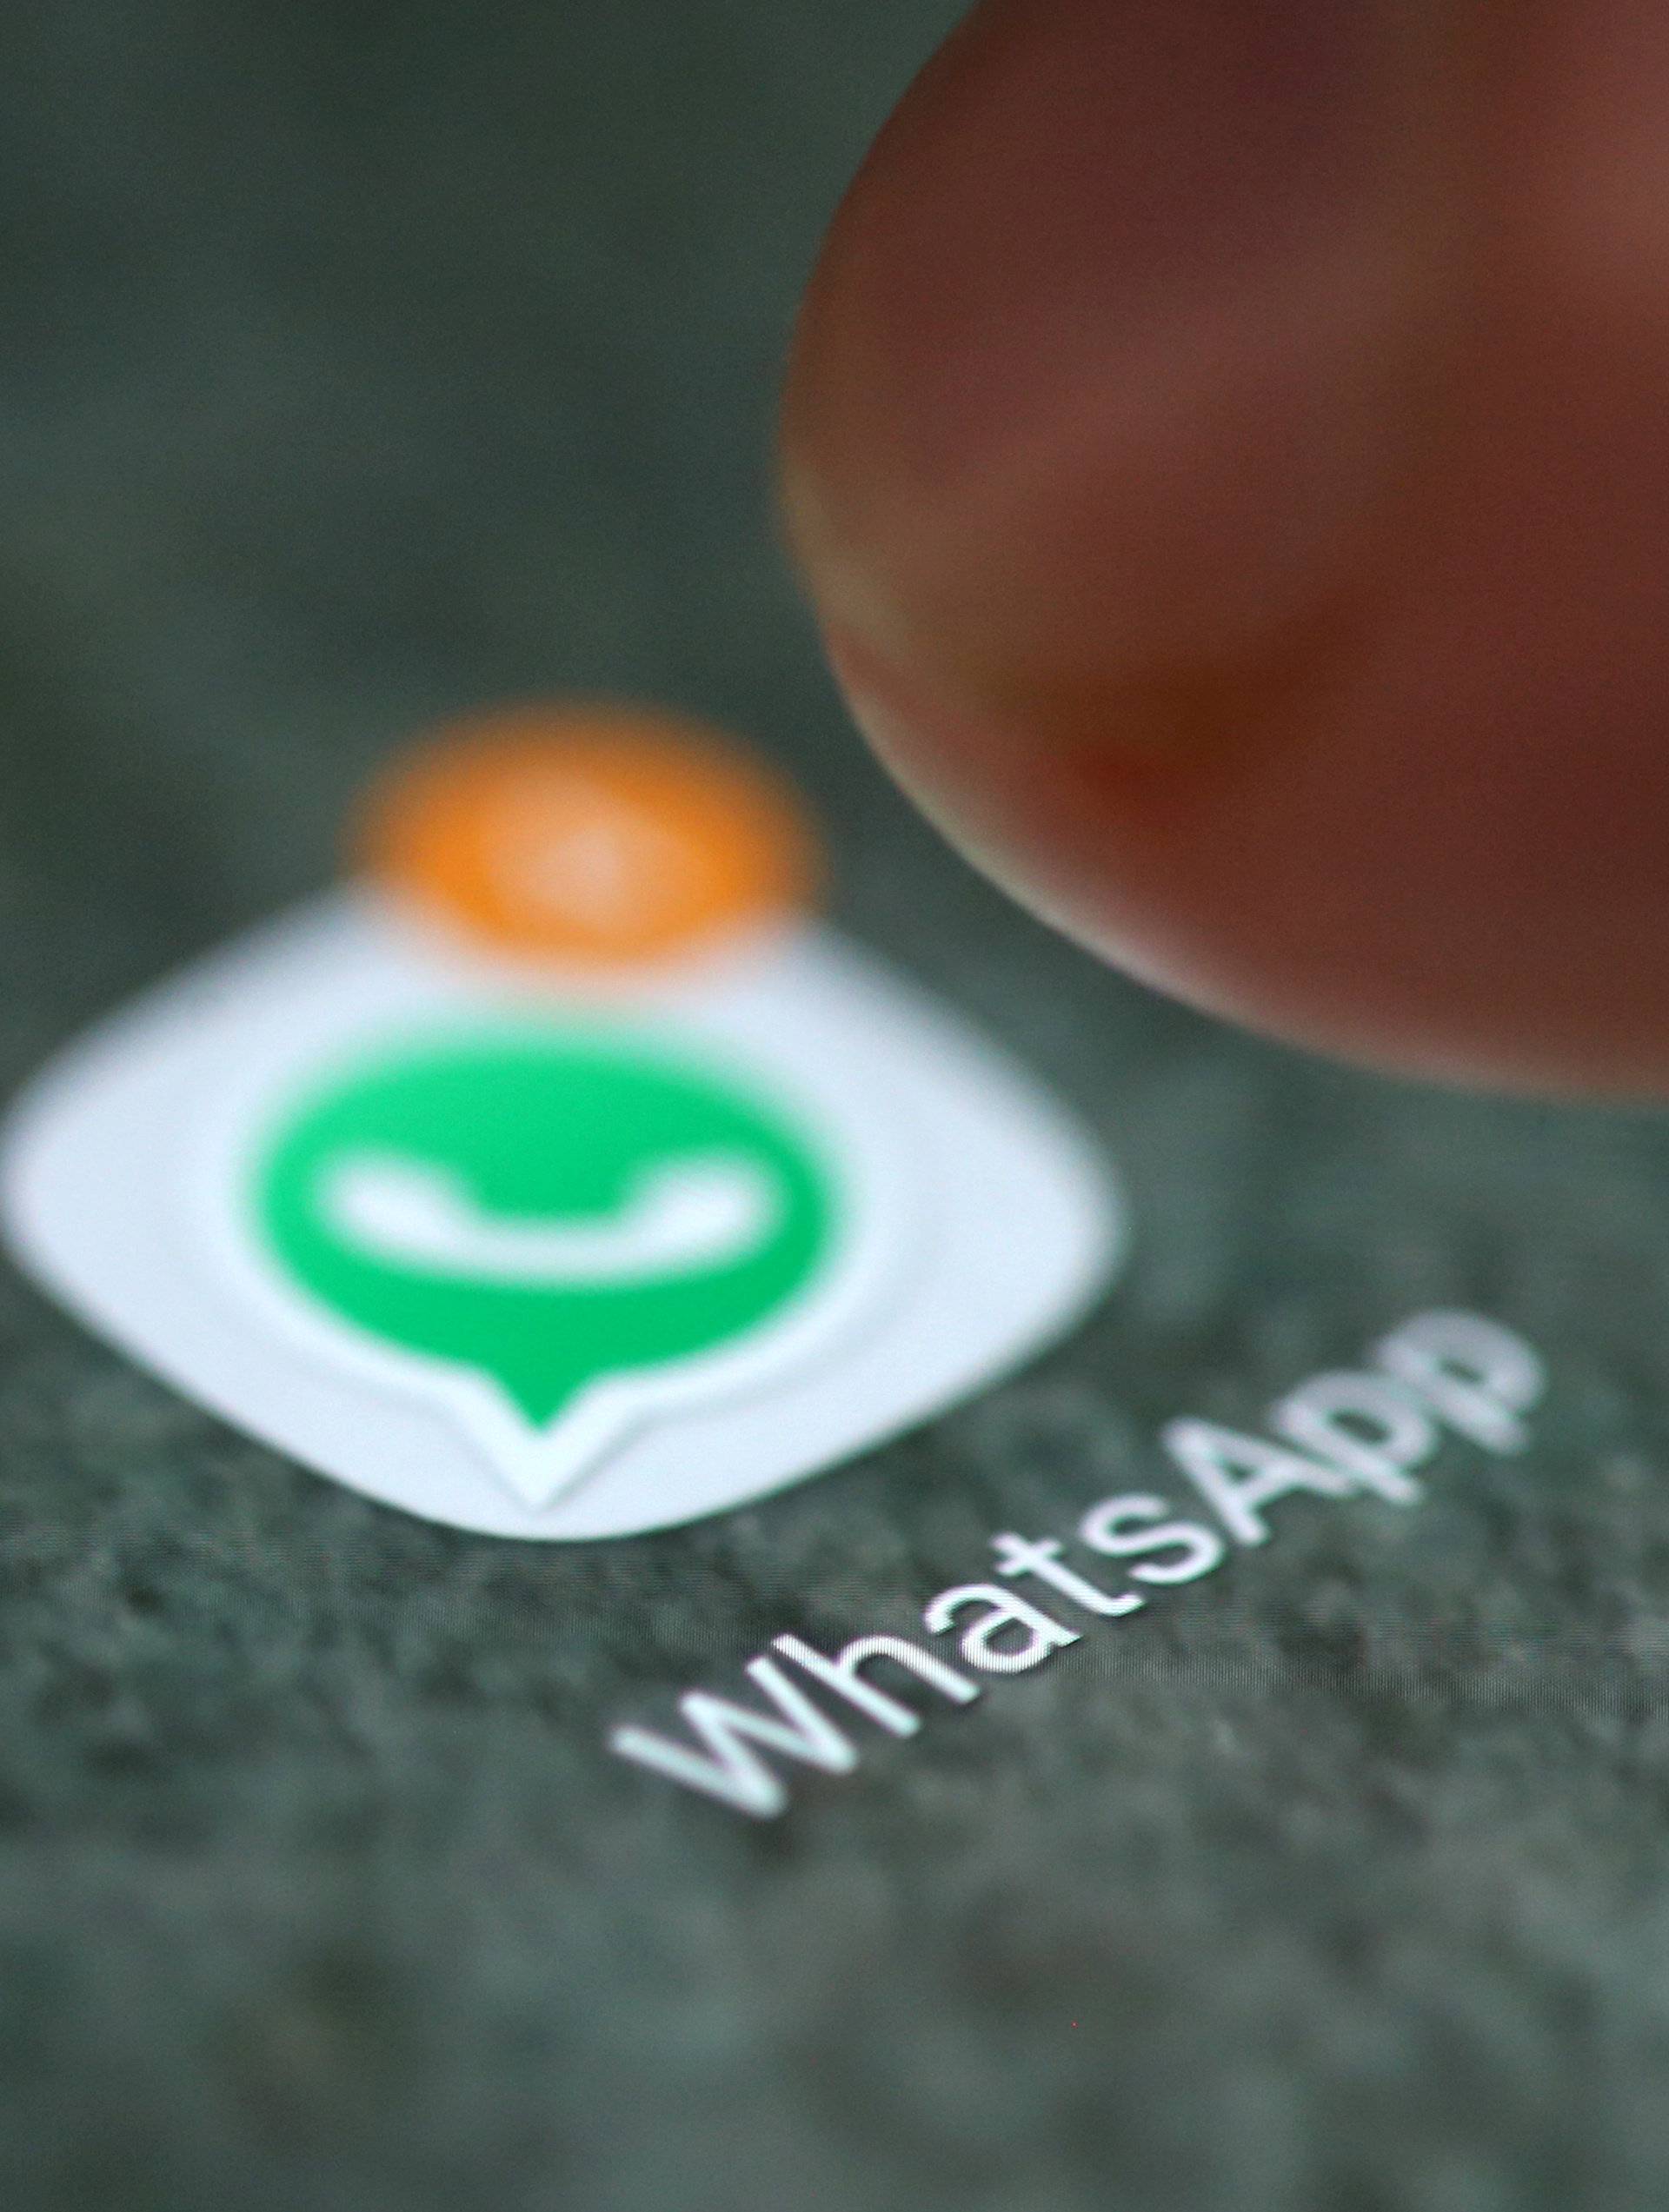 FILE PHOTO: The WhatsApp app logo is seen on a smartphone in this illustration